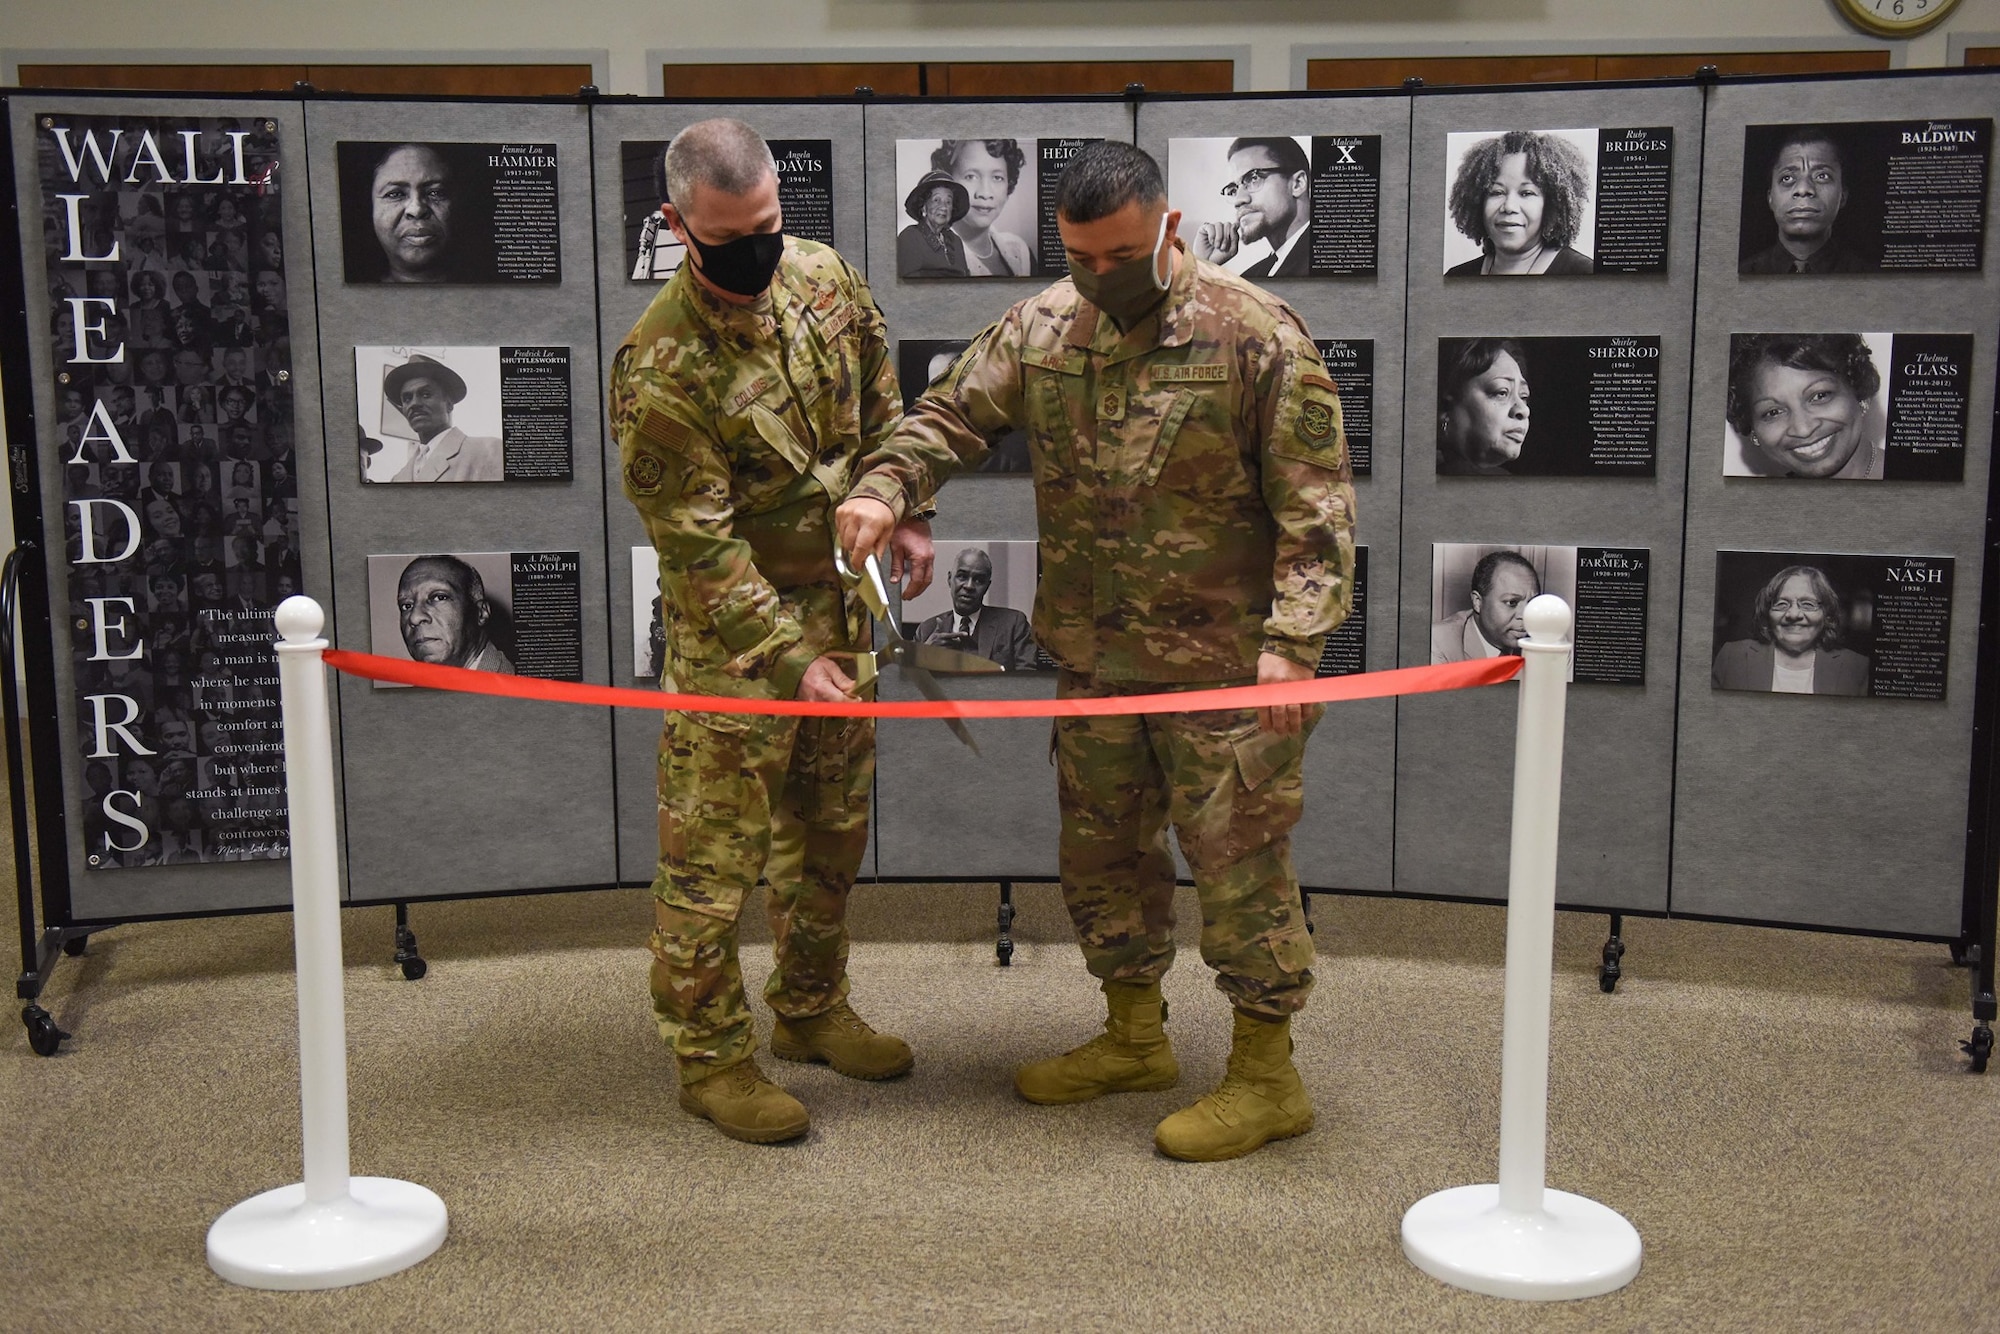 Col. Brian Collins, 62nd Airlift Wing (AW) vice commander (left), and Chief Master Sgt. Joseph Arce, 62nd AW command chief, cut a ribbon during the grand opening ceremony for the Martin Luther King Jr. and Civil Rights Movement Pop-Up Museum at Joint Base Lewis-McChord, Wash., Jan. 12, 2021. The museum will be open until Jan. 22, 2021, in honor of MLK Day. (U.S. Air Force photo by Airman 1st Class Callie Norton)